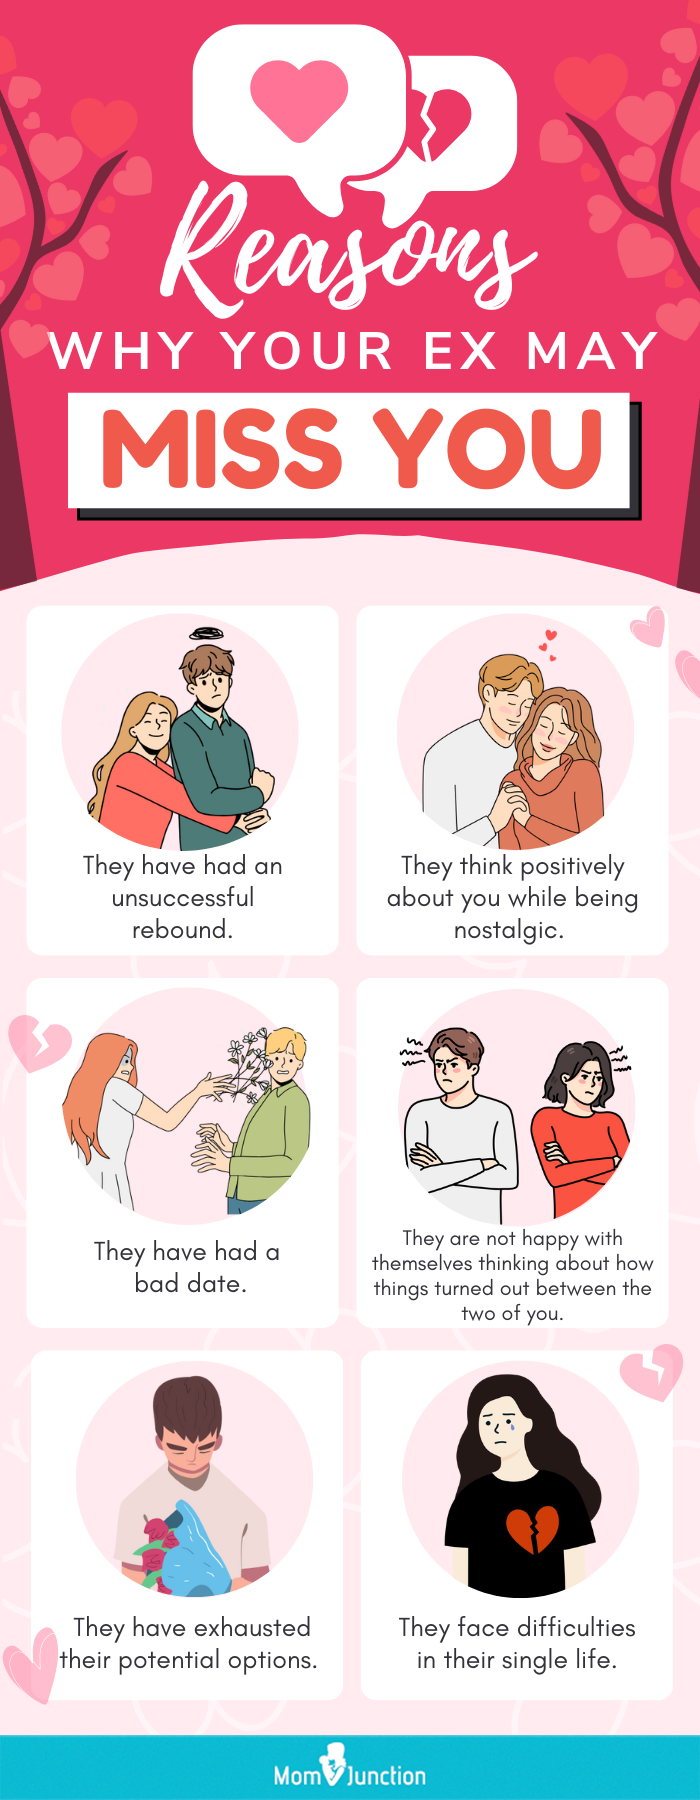 reasons why your ex may miss you [infographic]